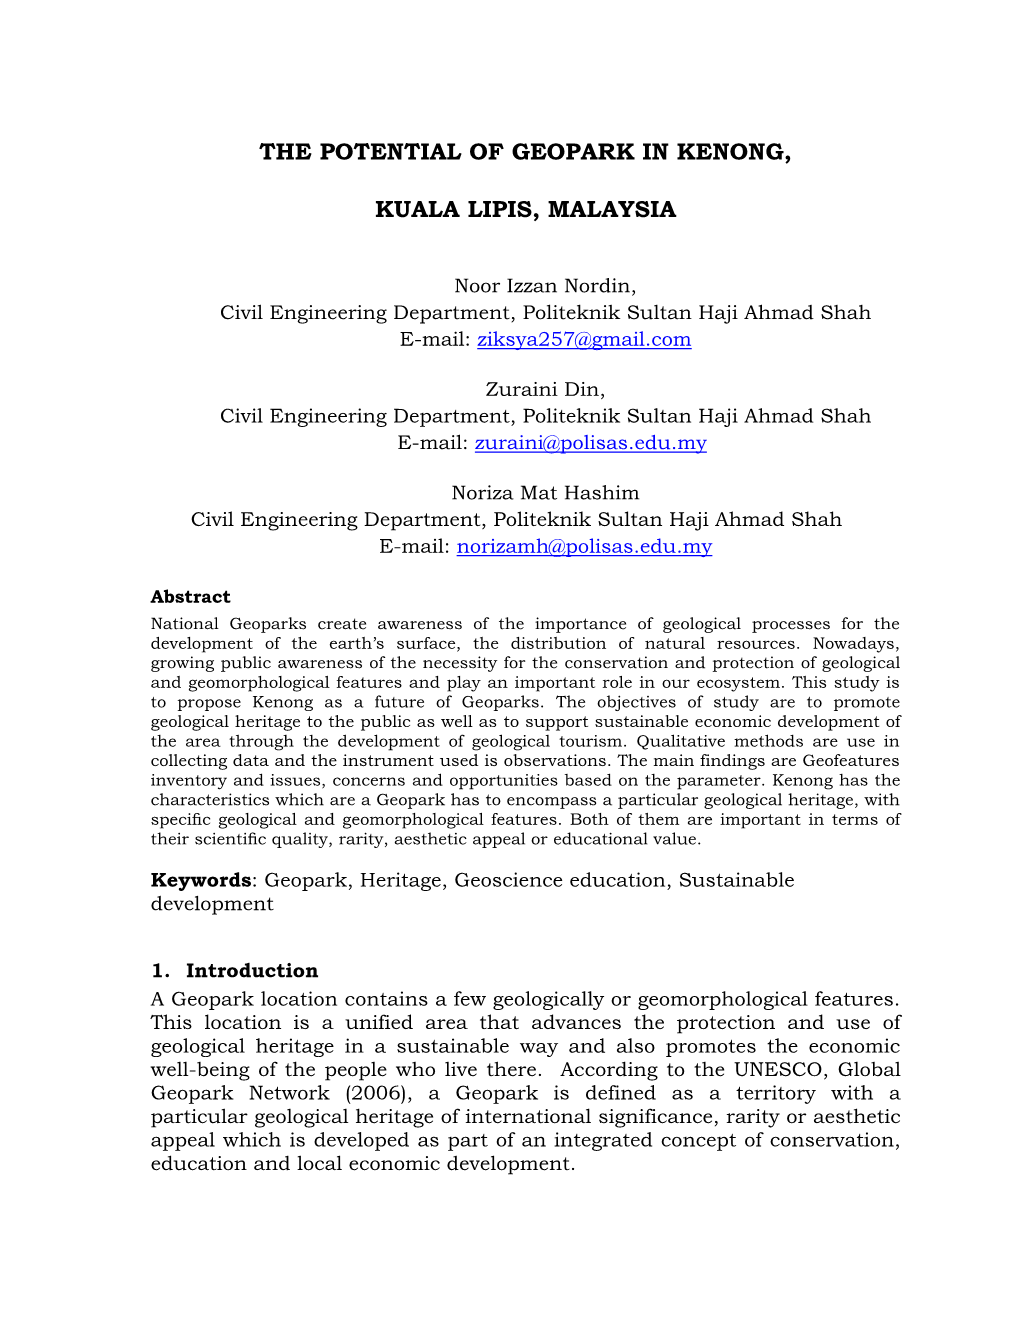 The Potential of Geopark in Kenong, Kuala Lipis, Malaysia